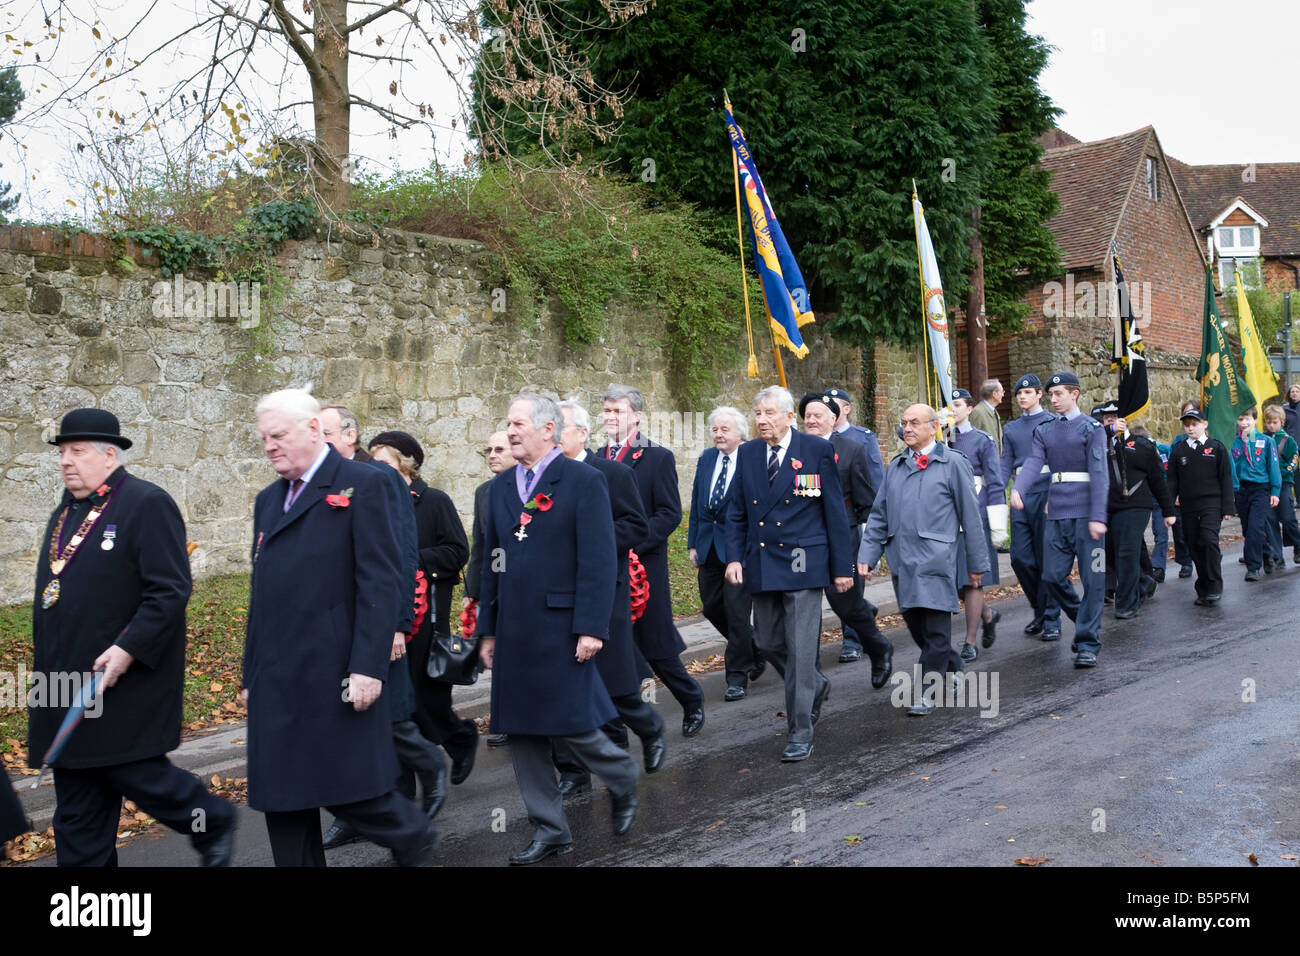 A Remembrance Day procession en route from the church to the War Memorial in Haslemere town centre, Surrey, England. Stock Photo